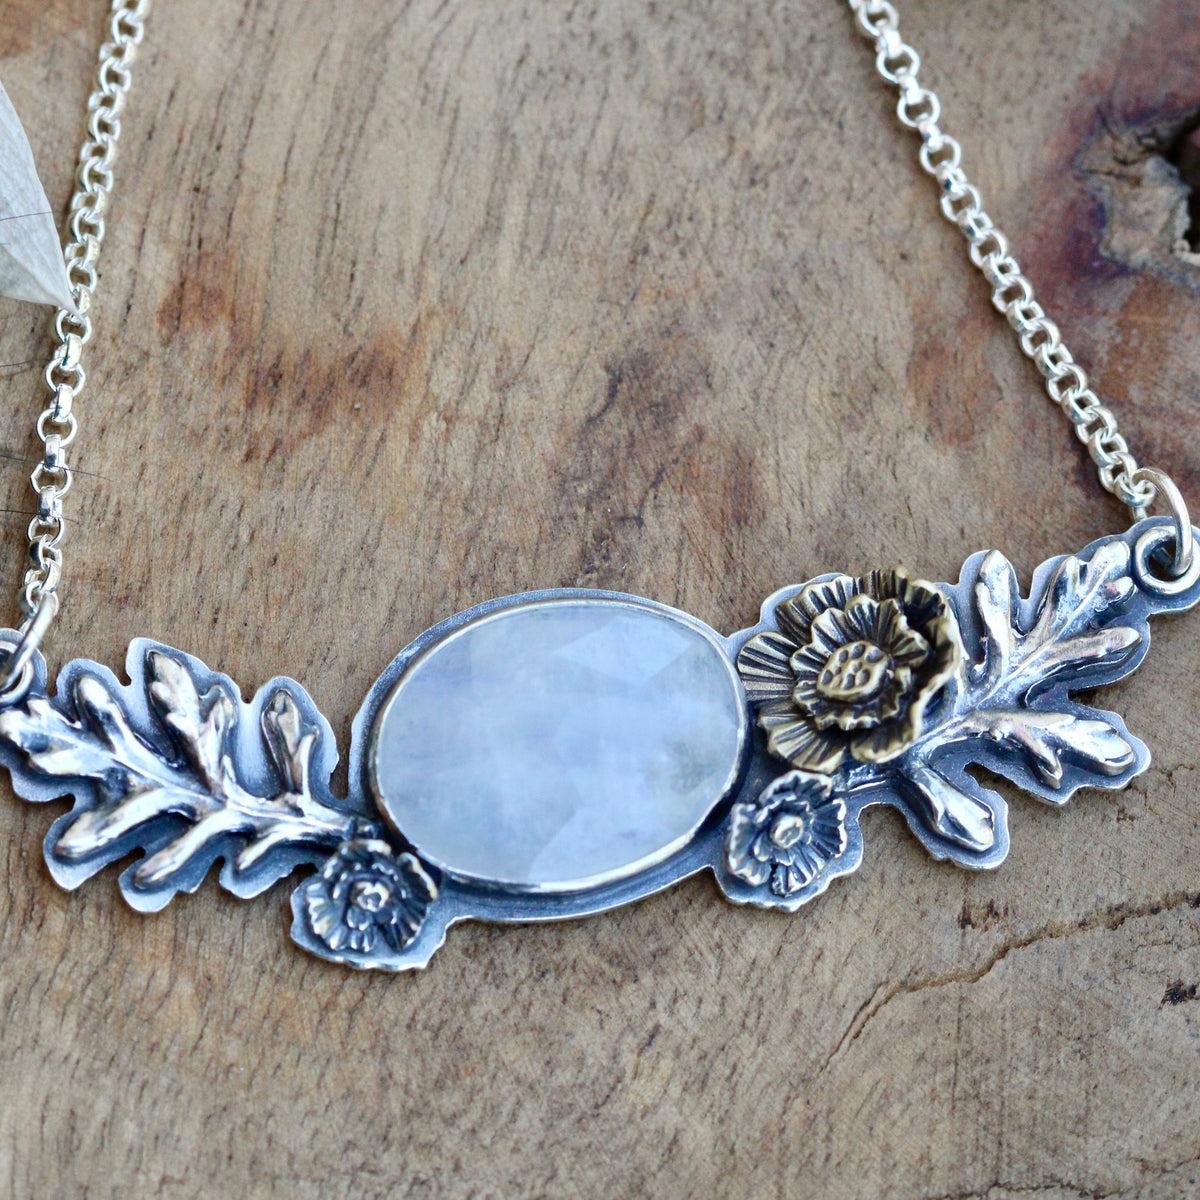 Clearance Sale Wildflower wanderings Moonstone and poppies necklace